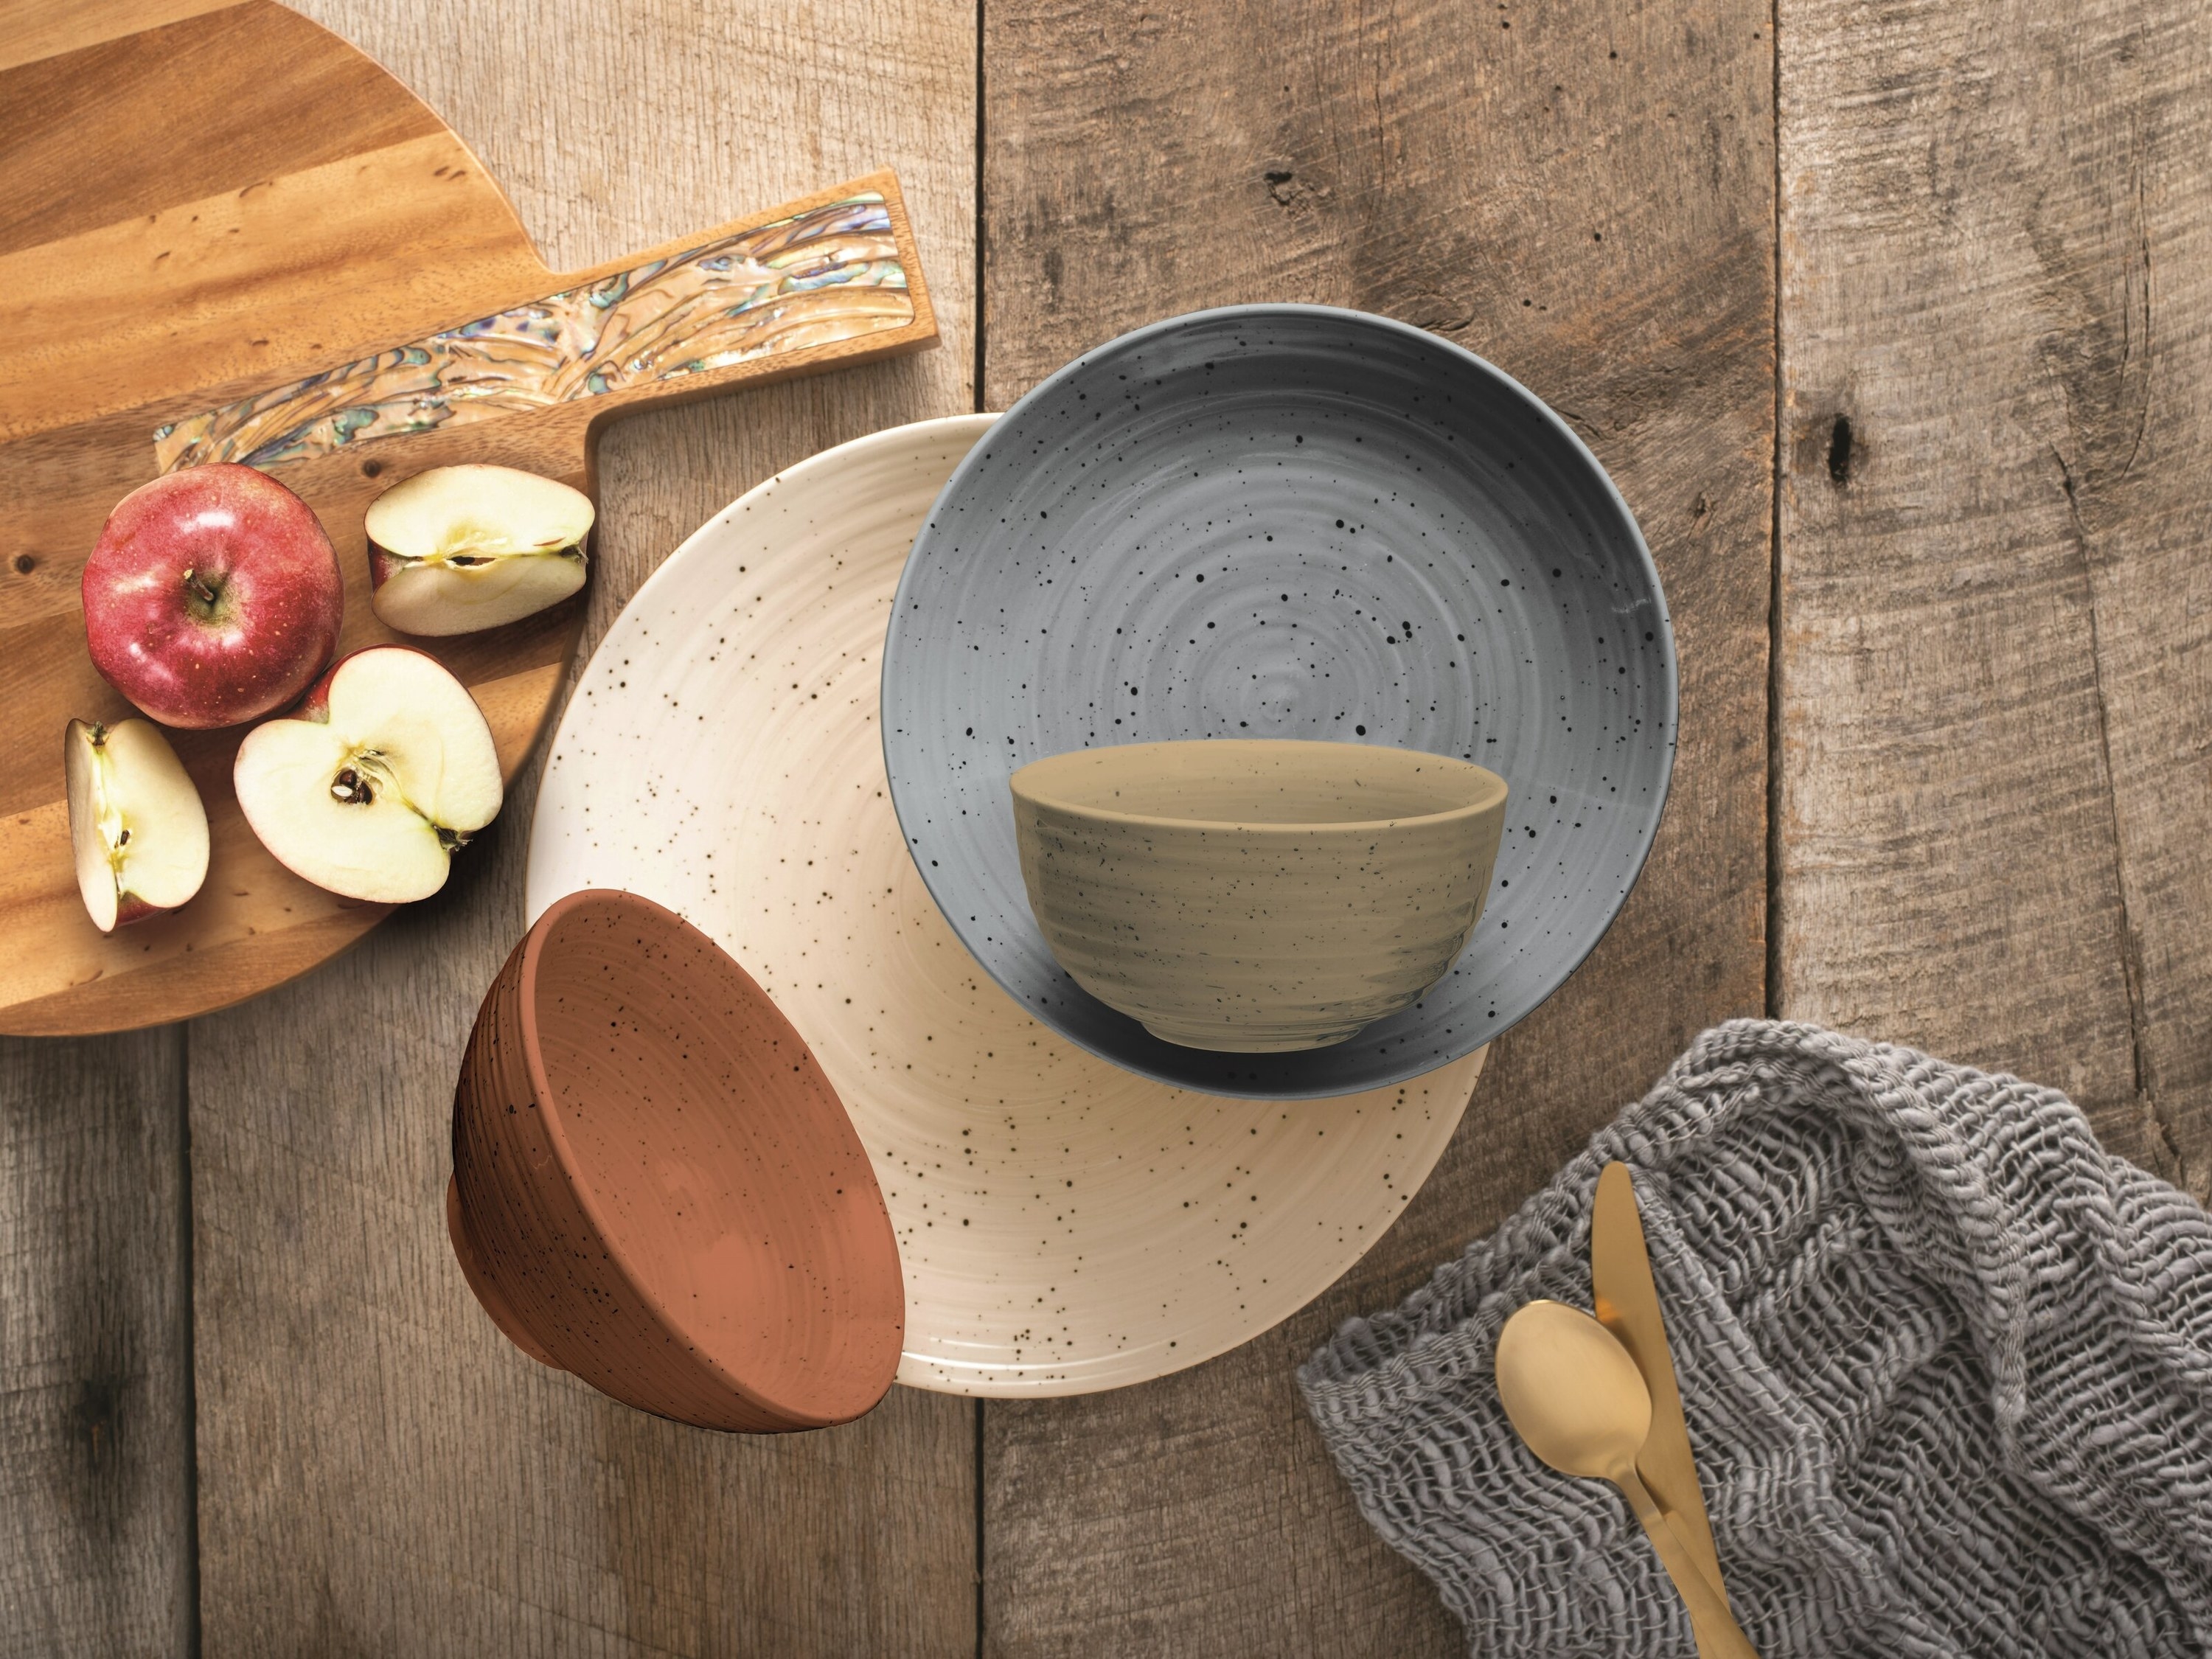 the stoneware dishes in multiple colors